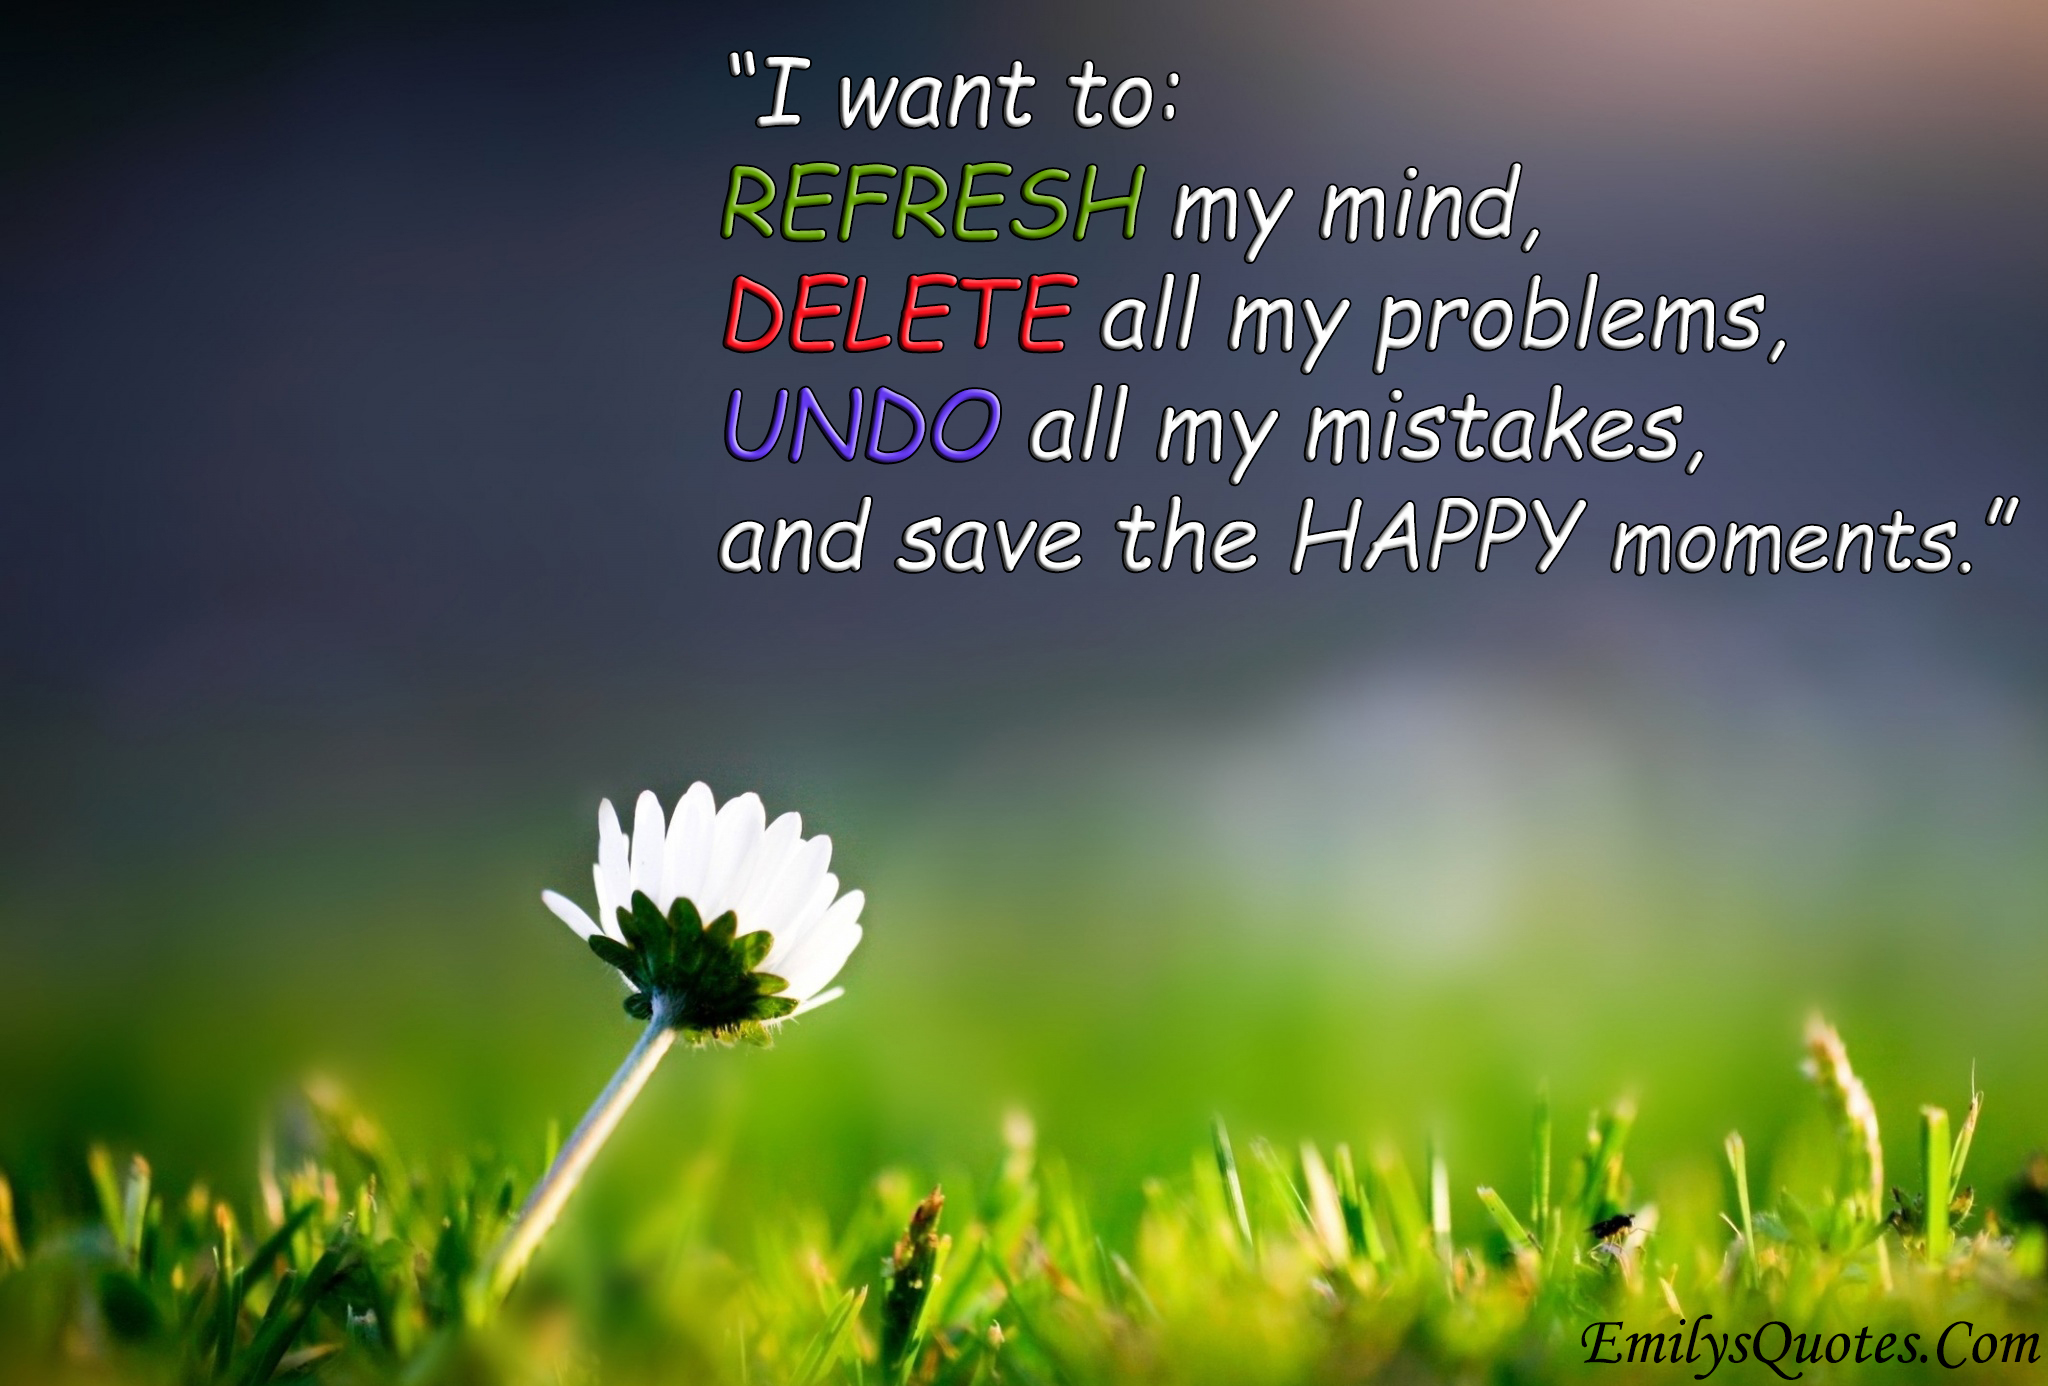 I want to:  REFRESH my mind,  DELETE all my problems,  UNDO all my mistakes,  and SAVE the happy moments